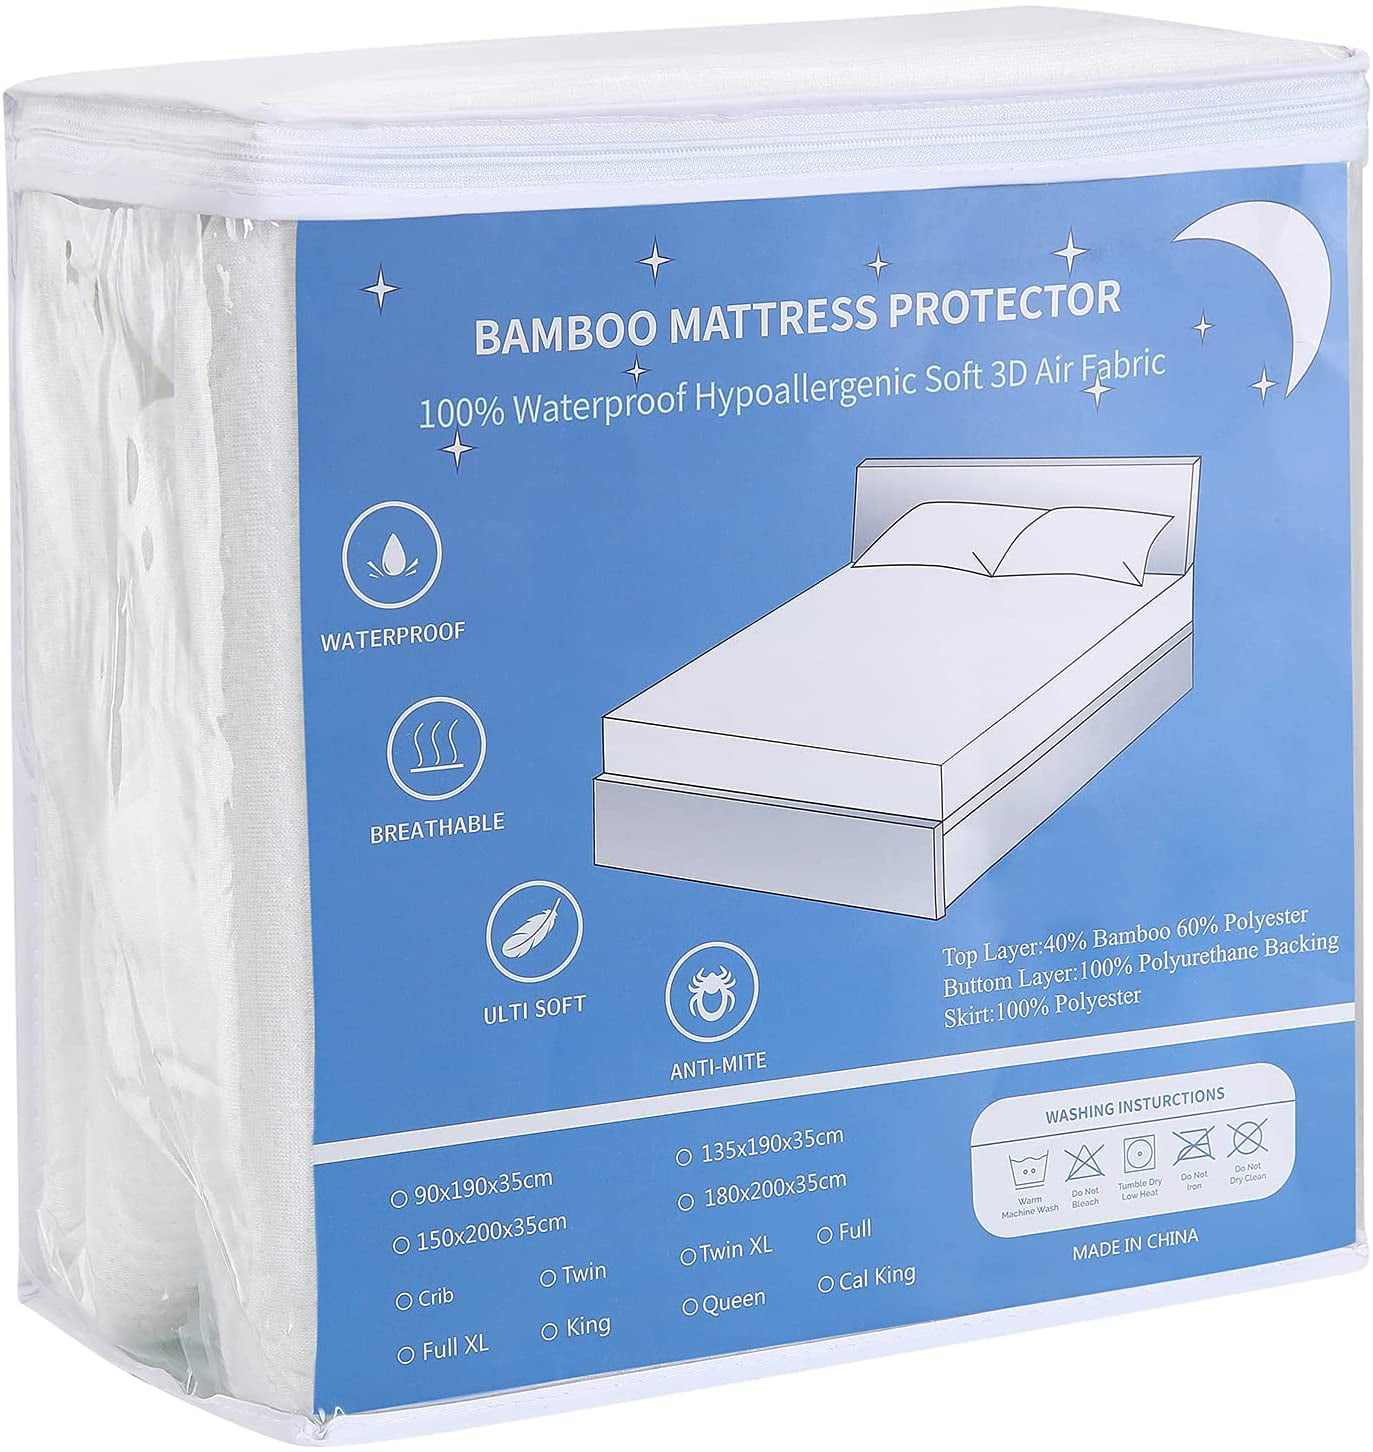 Details about   Bamboo Mattress Protector Topper Bed Cover Pad Waterproof Soft Washable US 